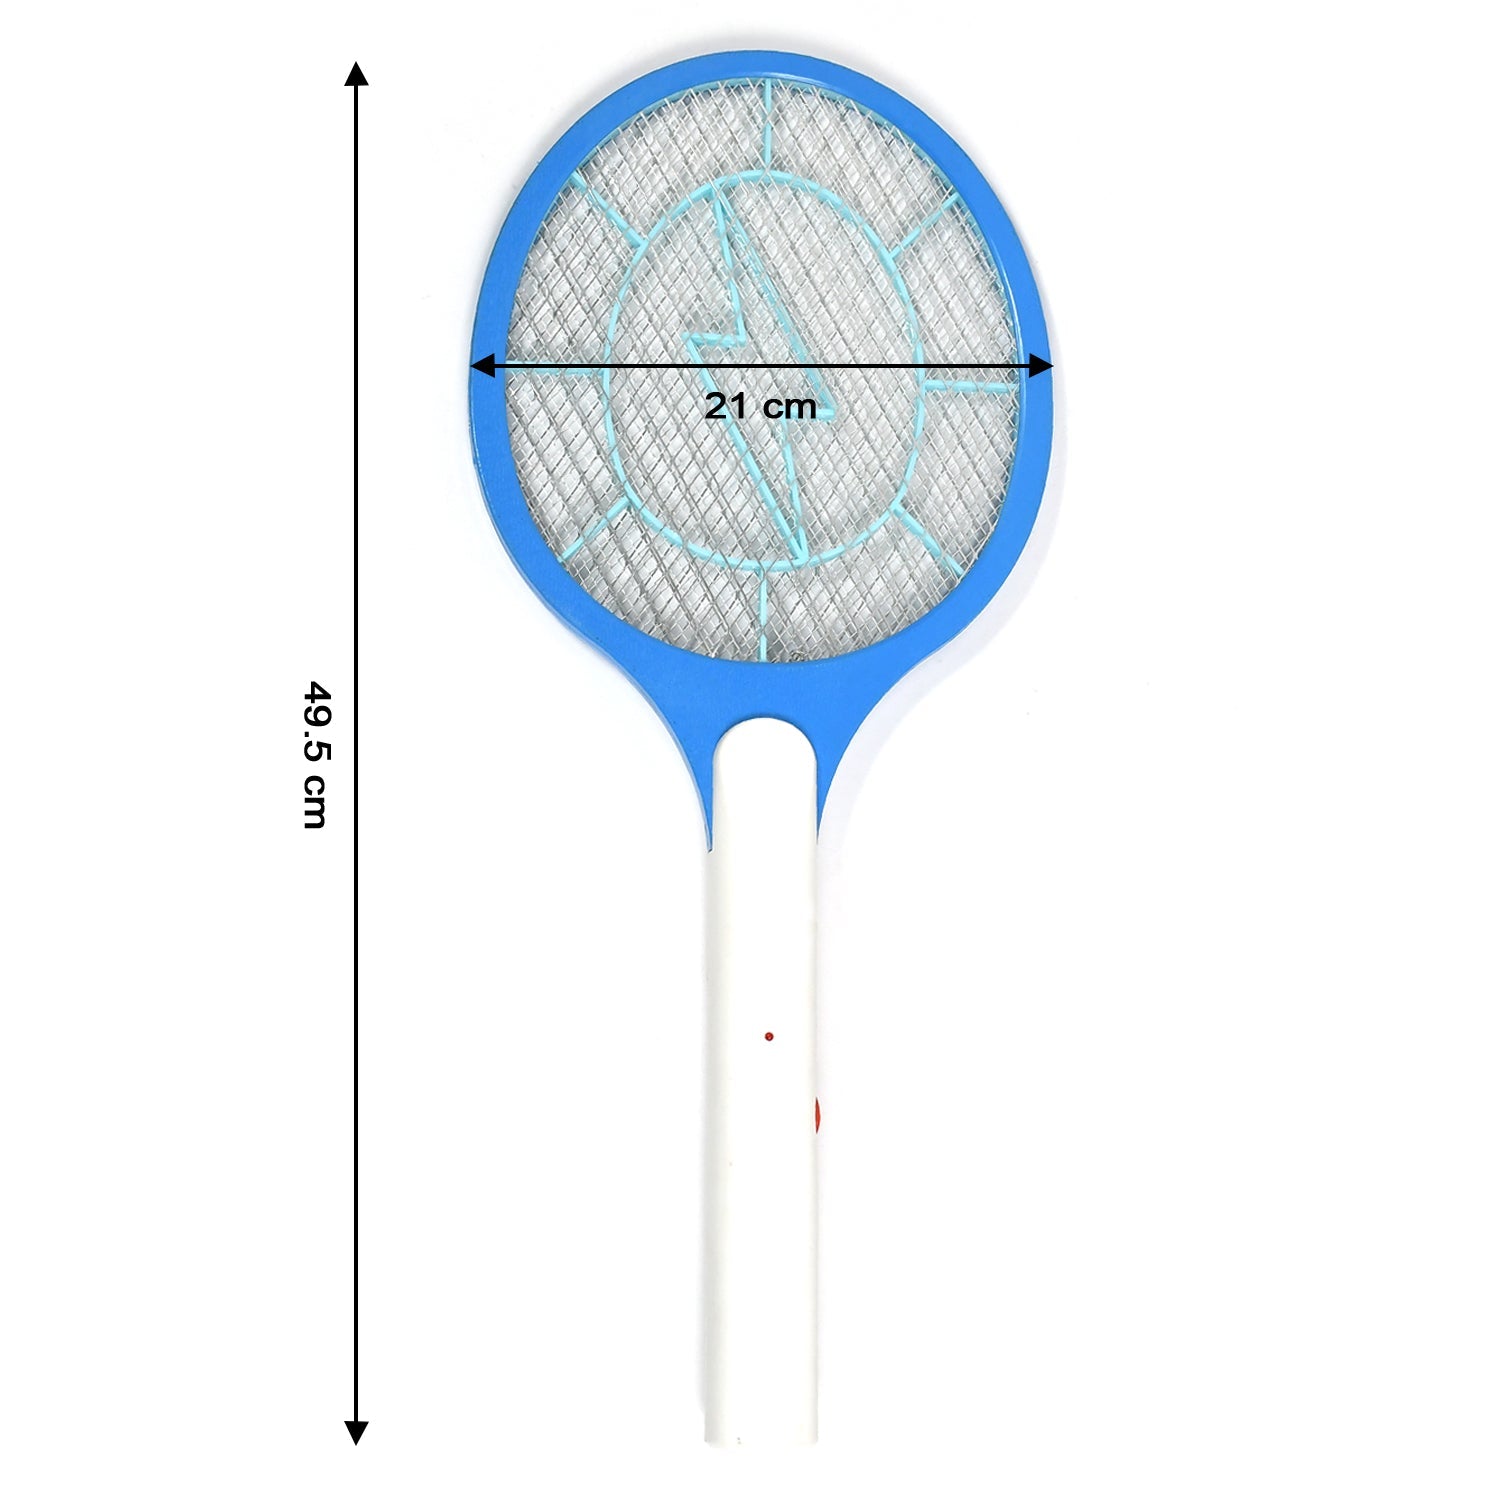 1724 Mosquito Killer Racket Rechargeable Handheld Electric Fly Swatter Mosquito Killer Racket Bat, Electric Insect Killer (Quality Assured) DeoDap